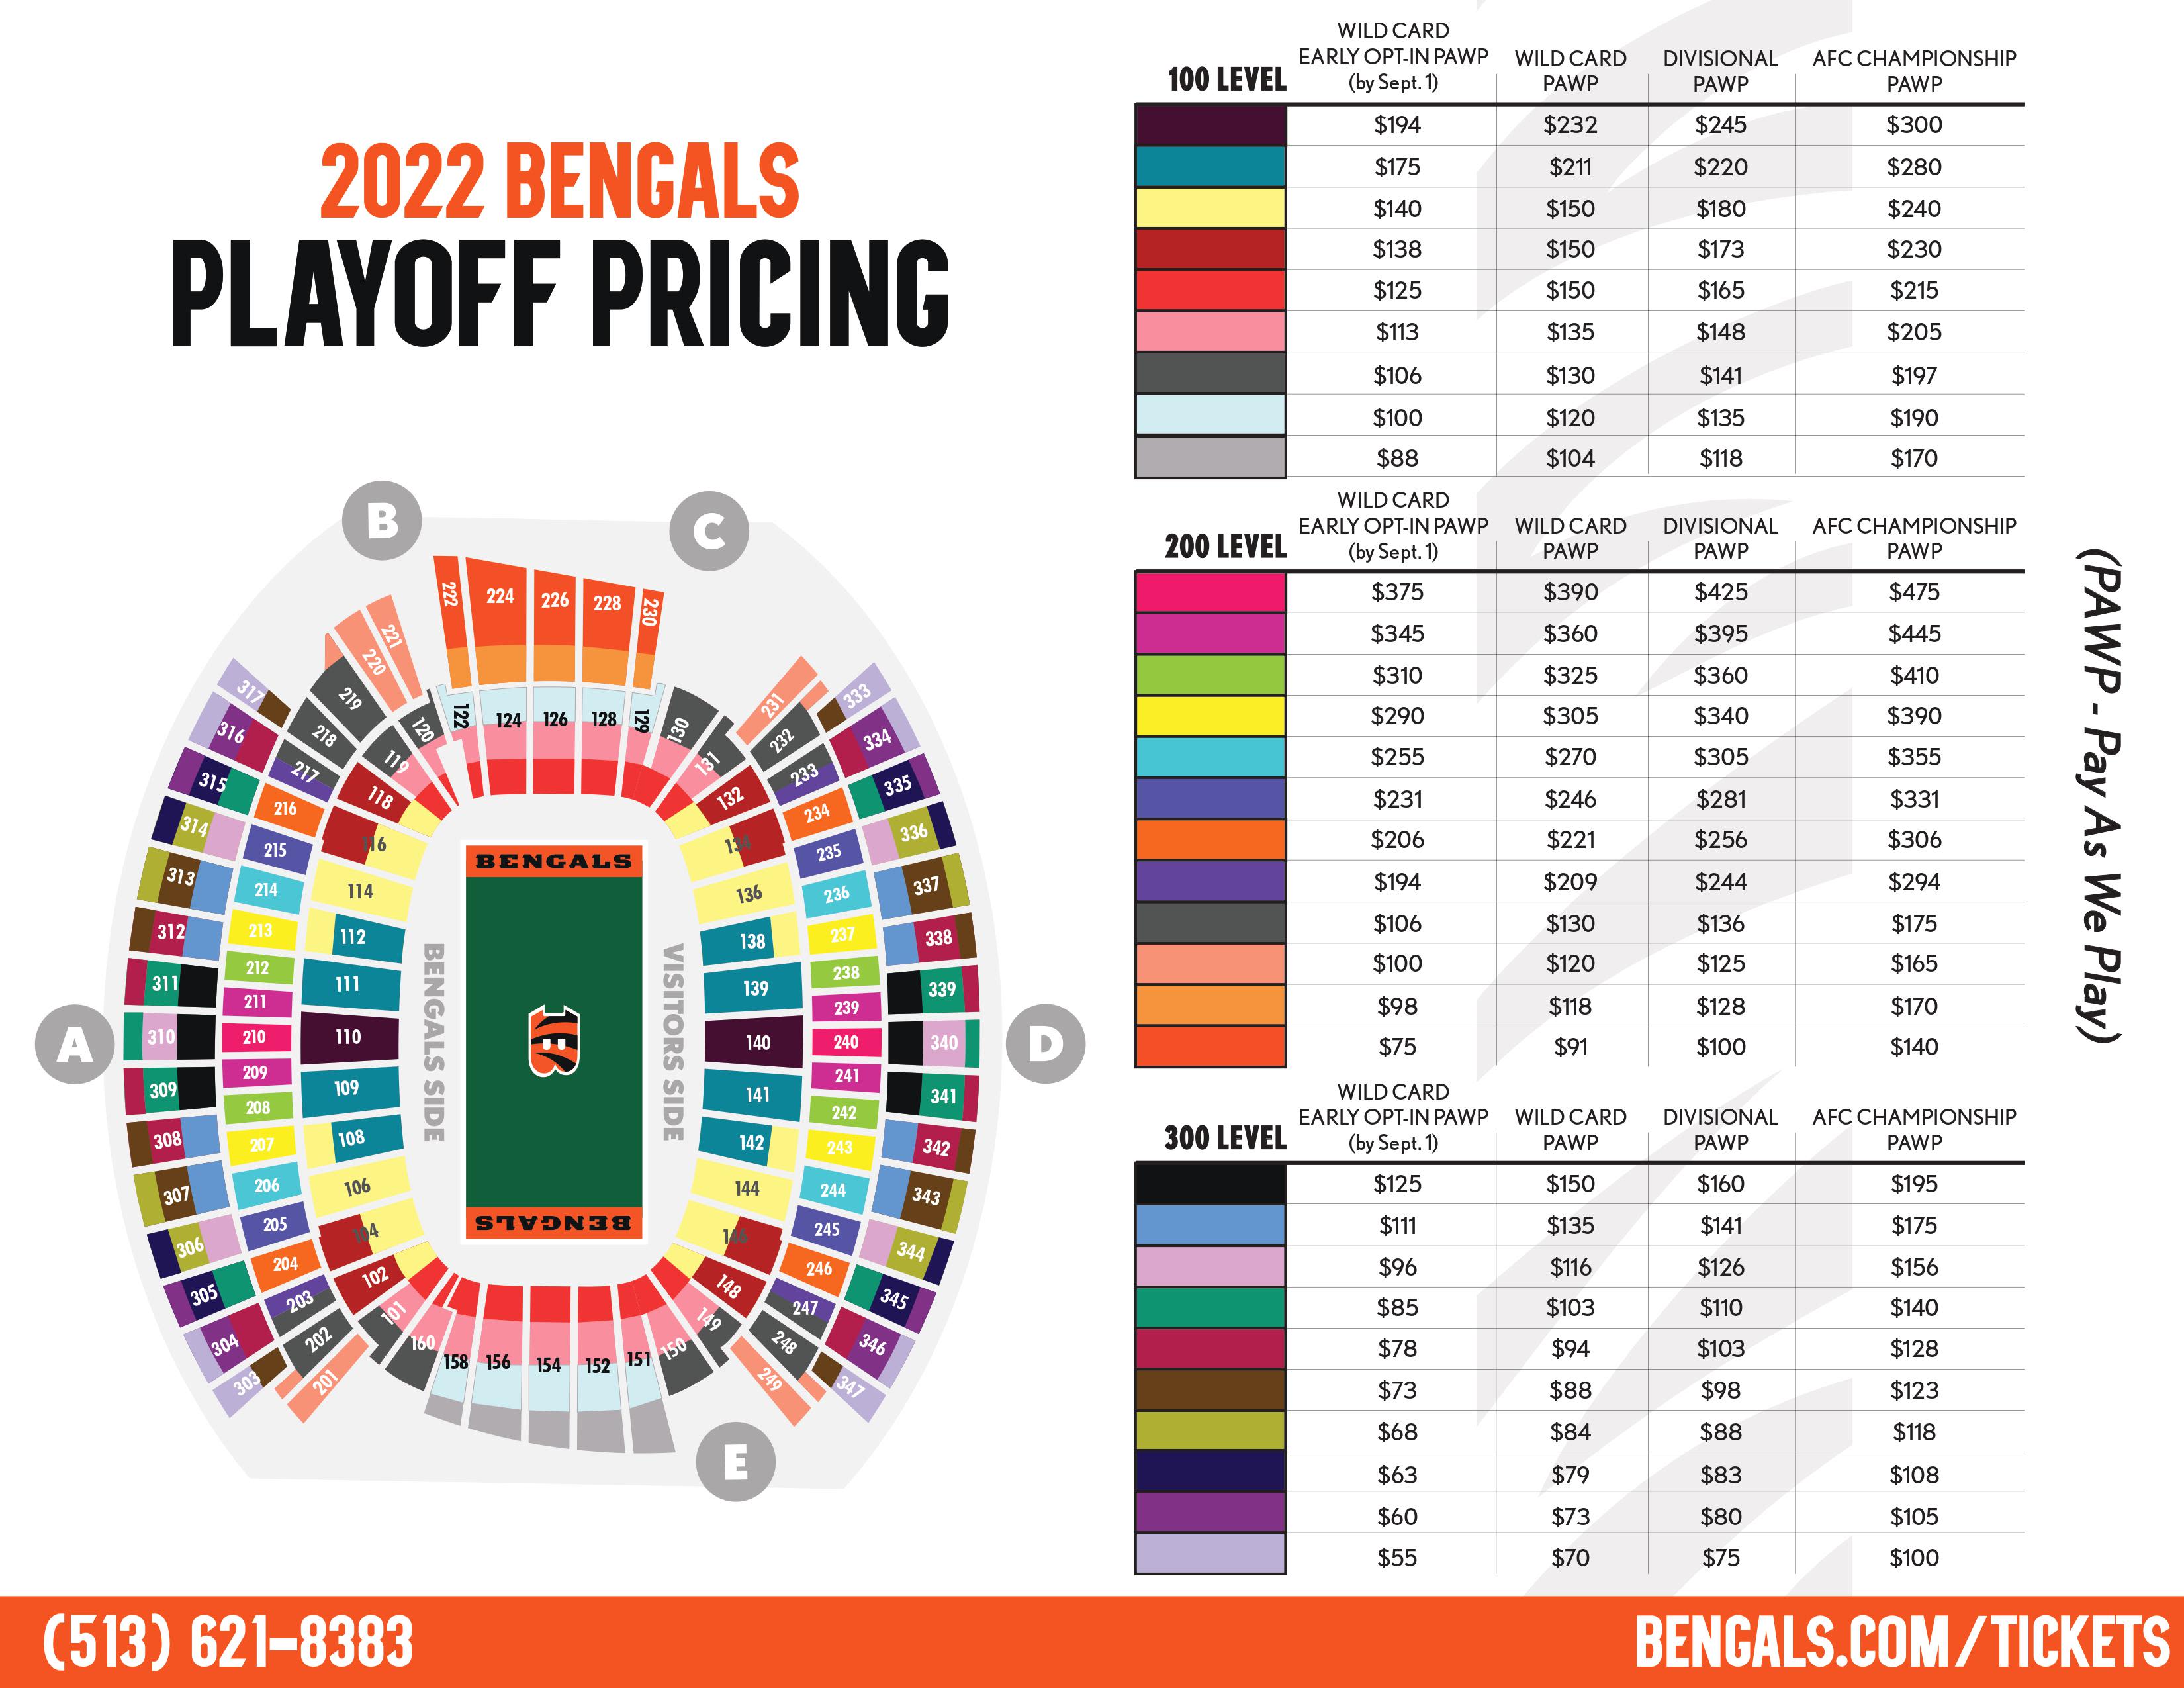 cost of afc championship game tickets